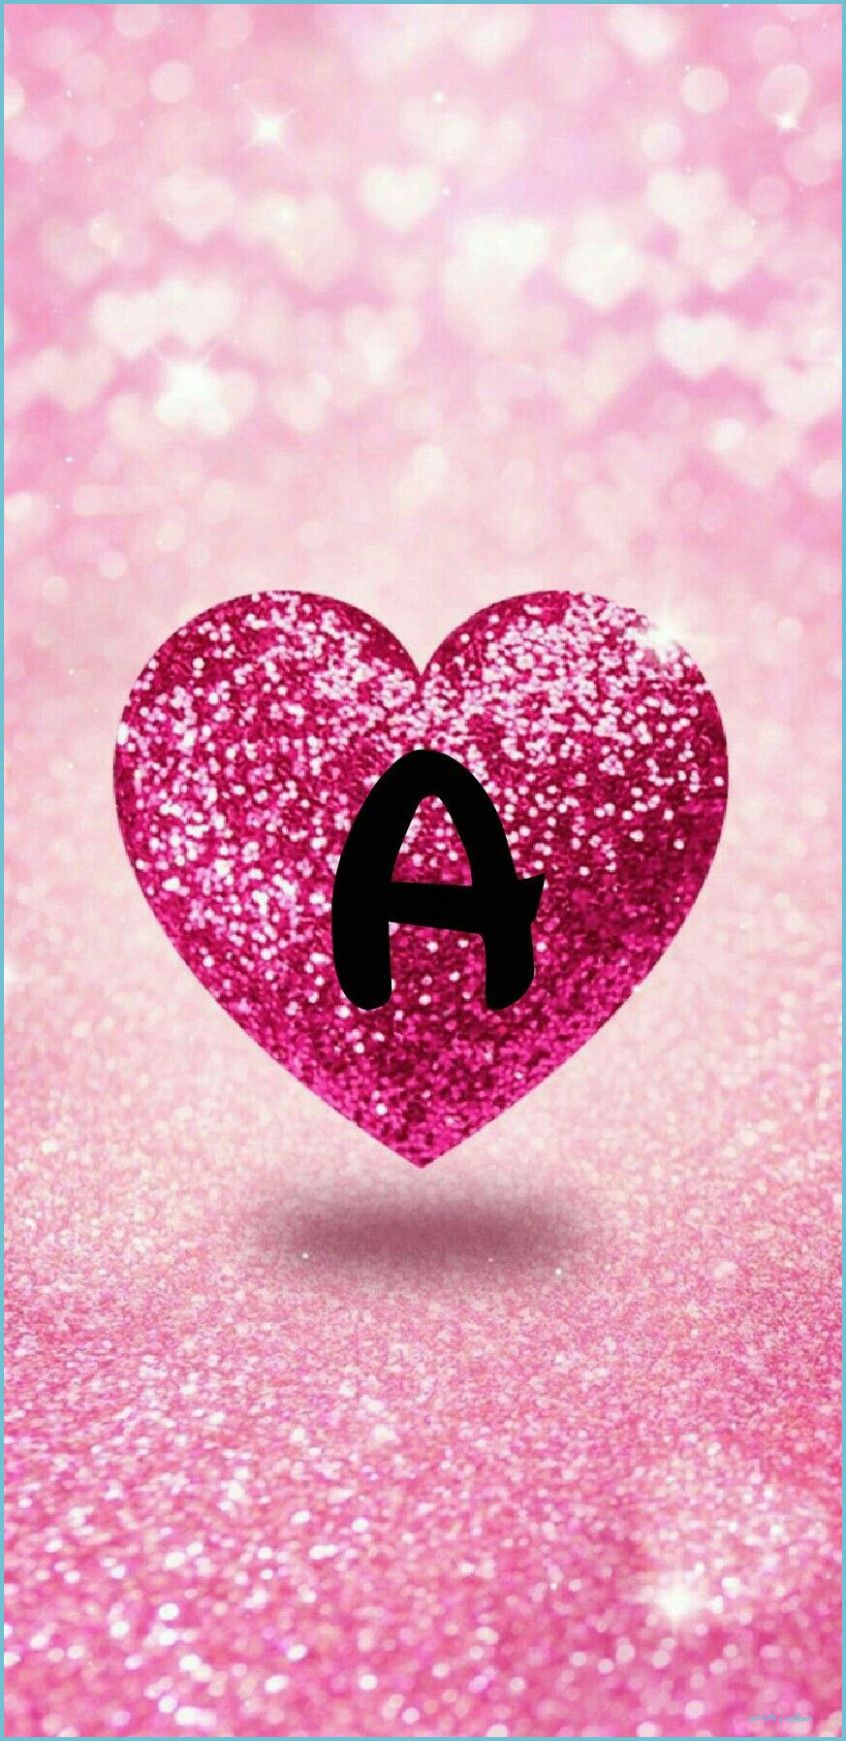 Cute Letter A Wallpaper Free Cute Letter A Background letter a wallpaper